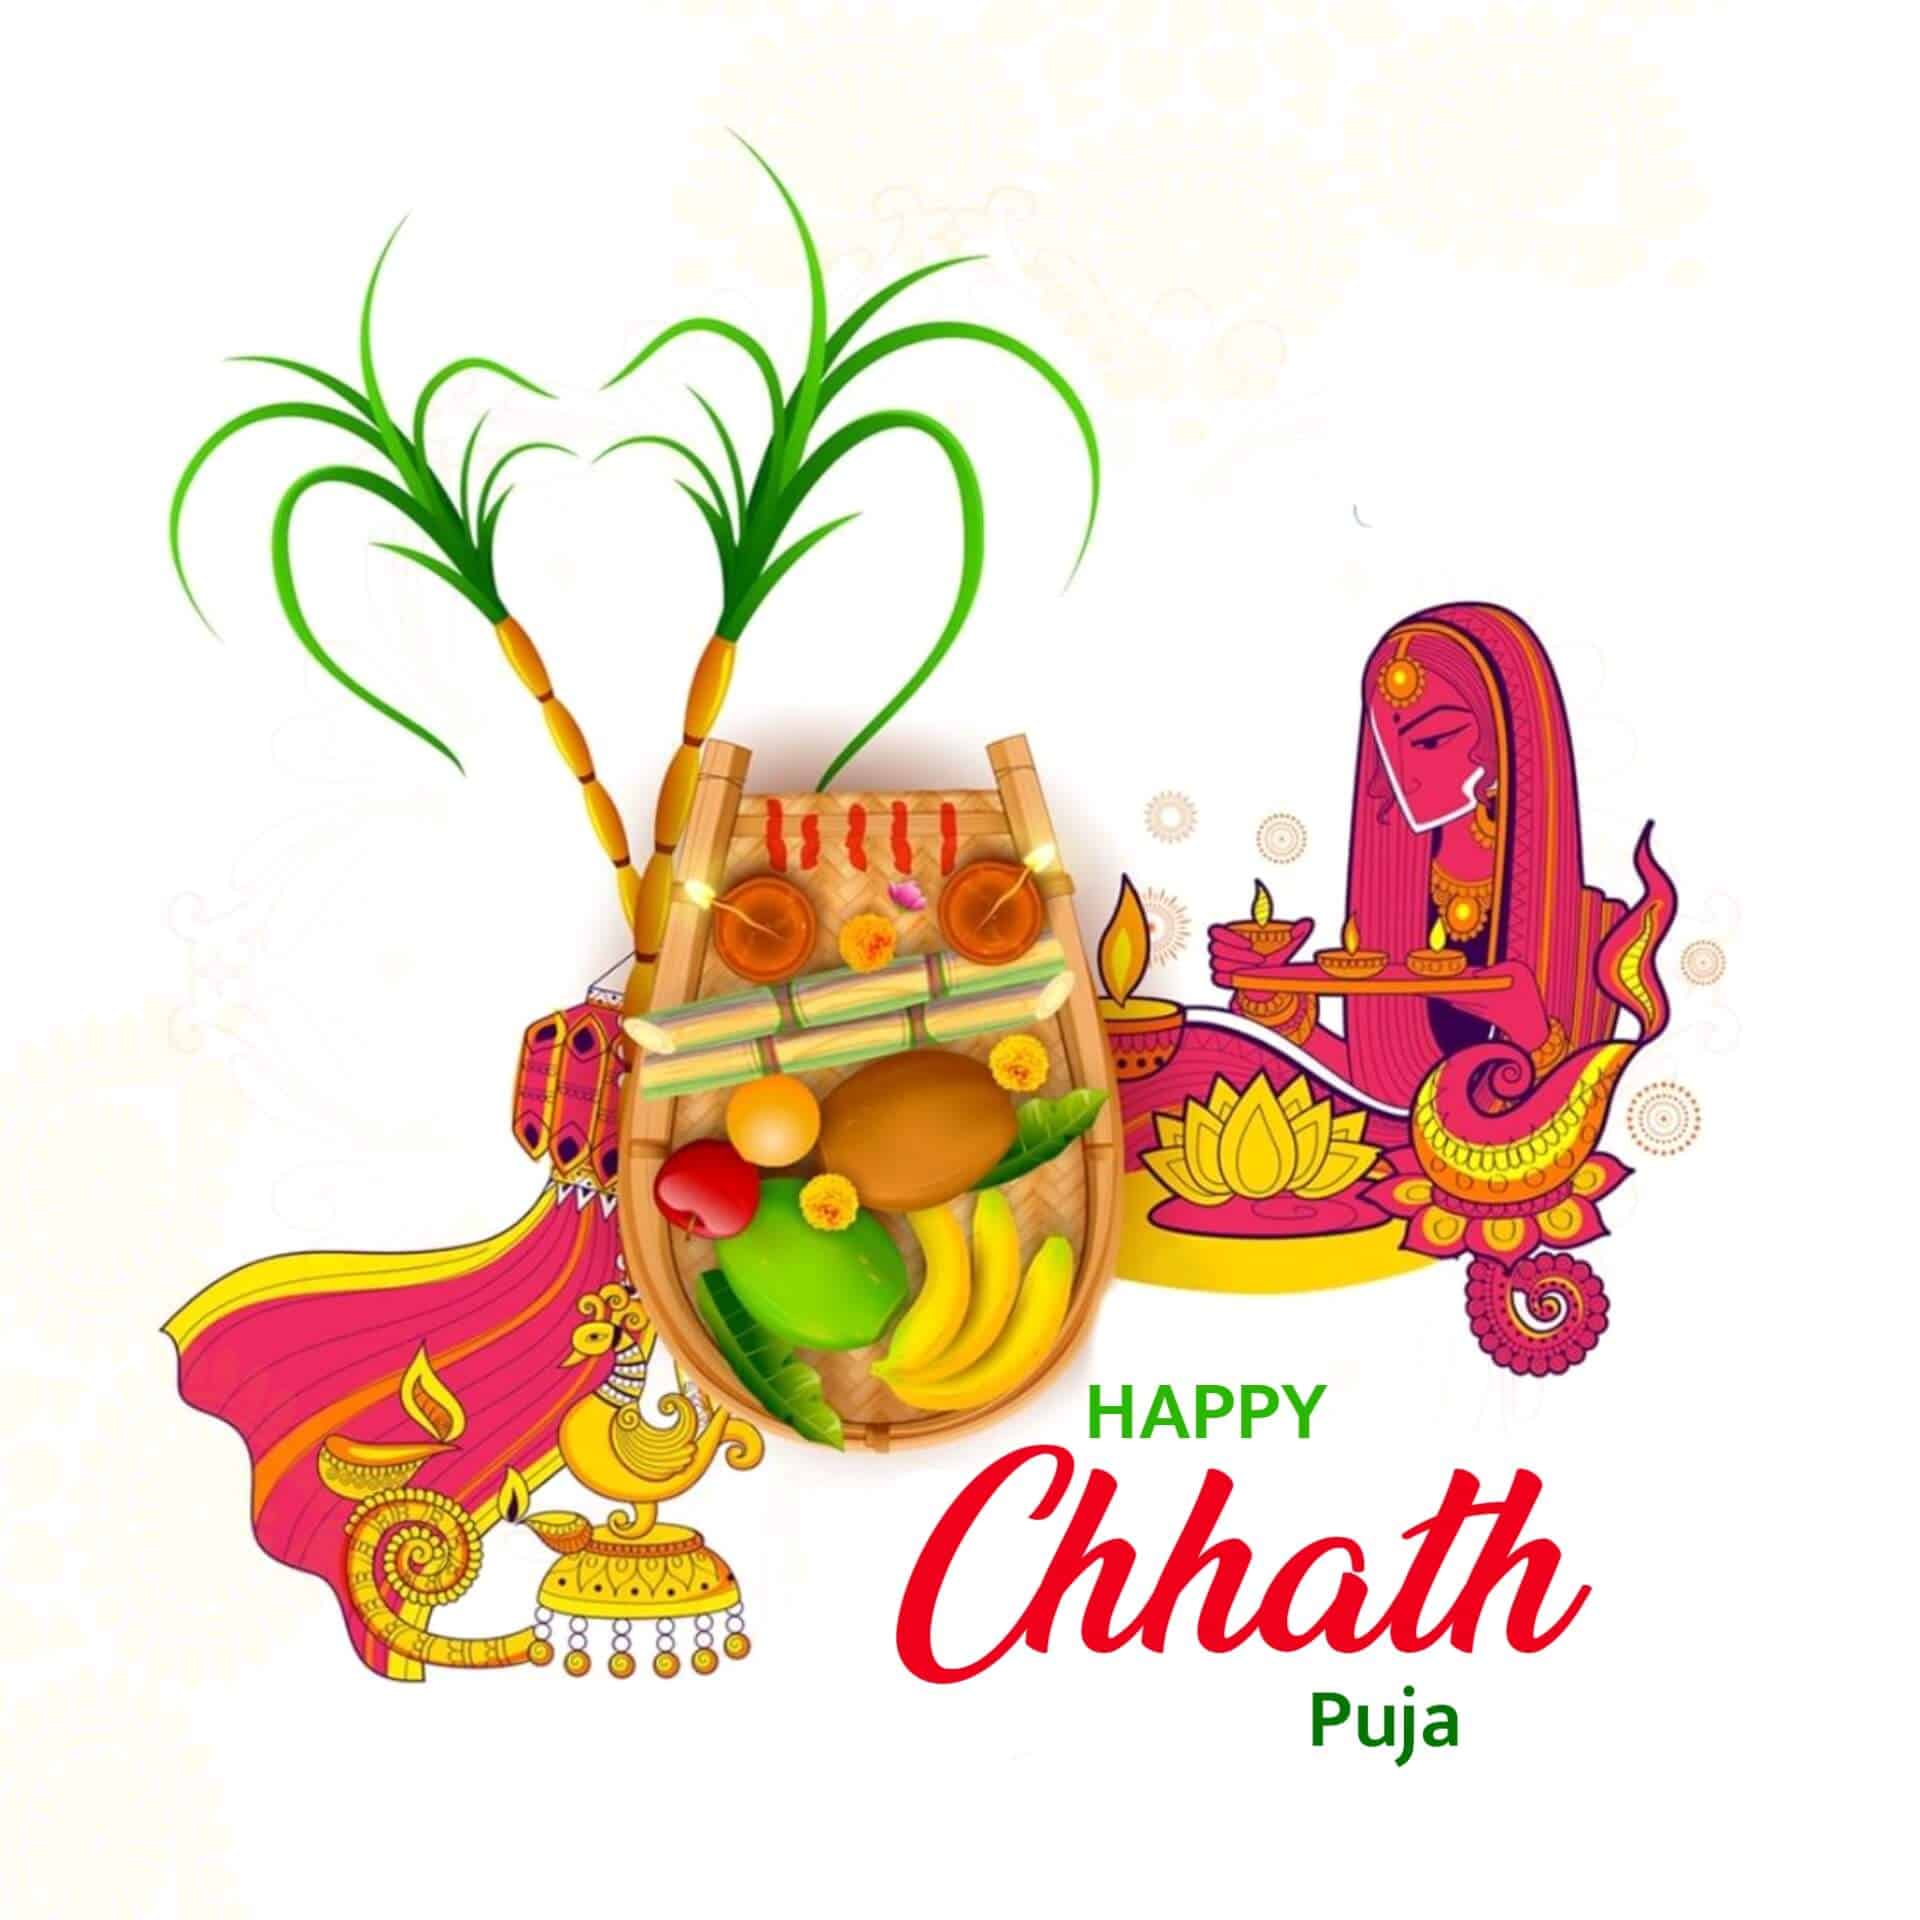 Chhath Puja Images HD